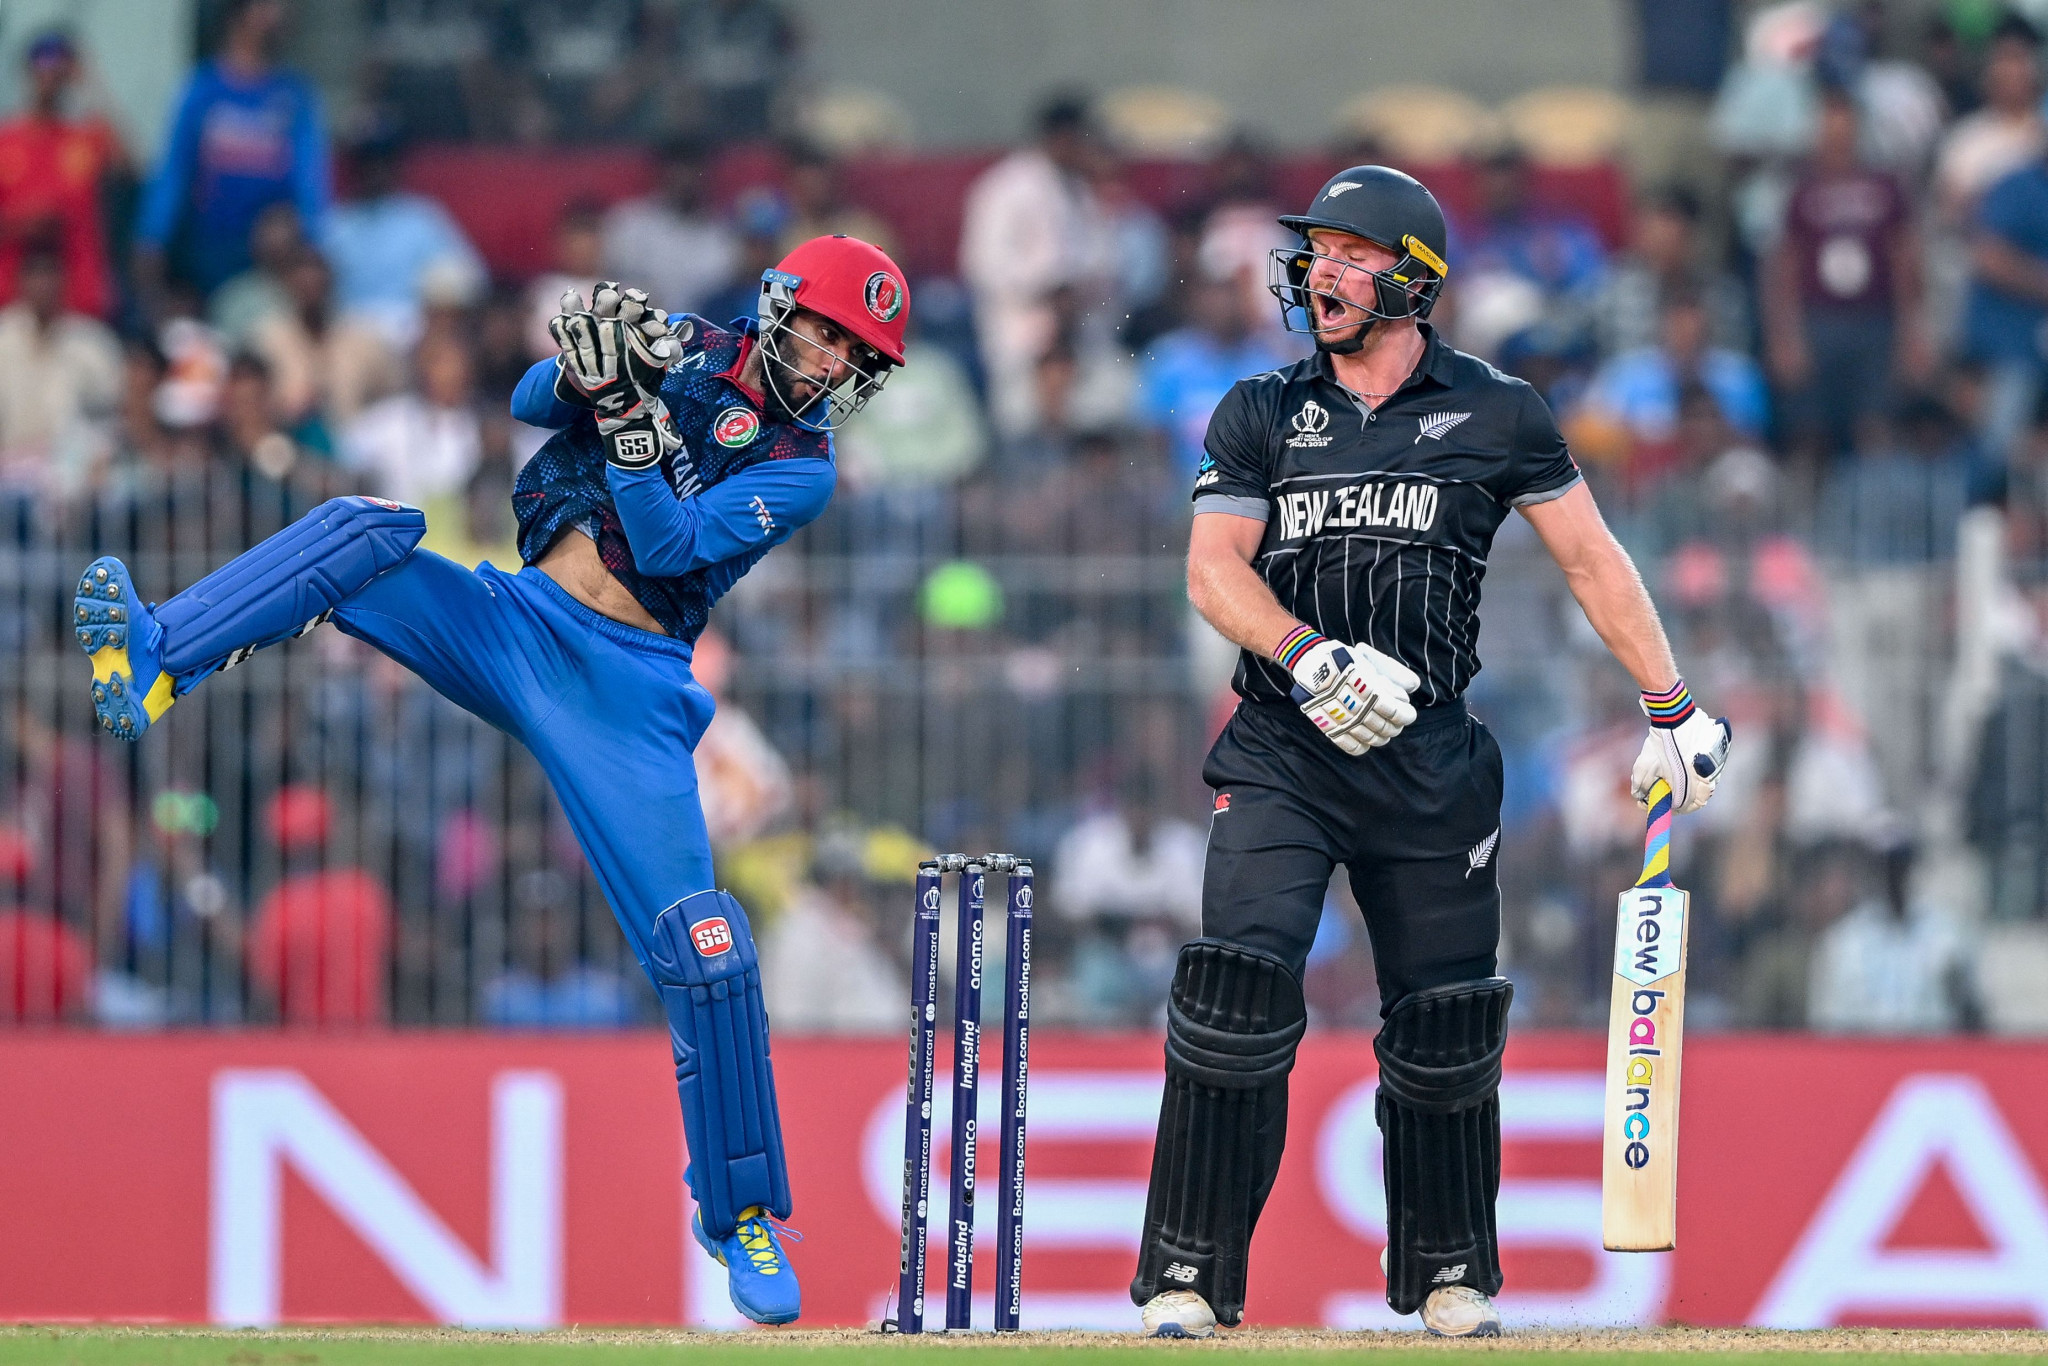 Afghanistan were hampered by a litany of fielding errors as they were beaten by New Zealand in Chennai ©Getty Images